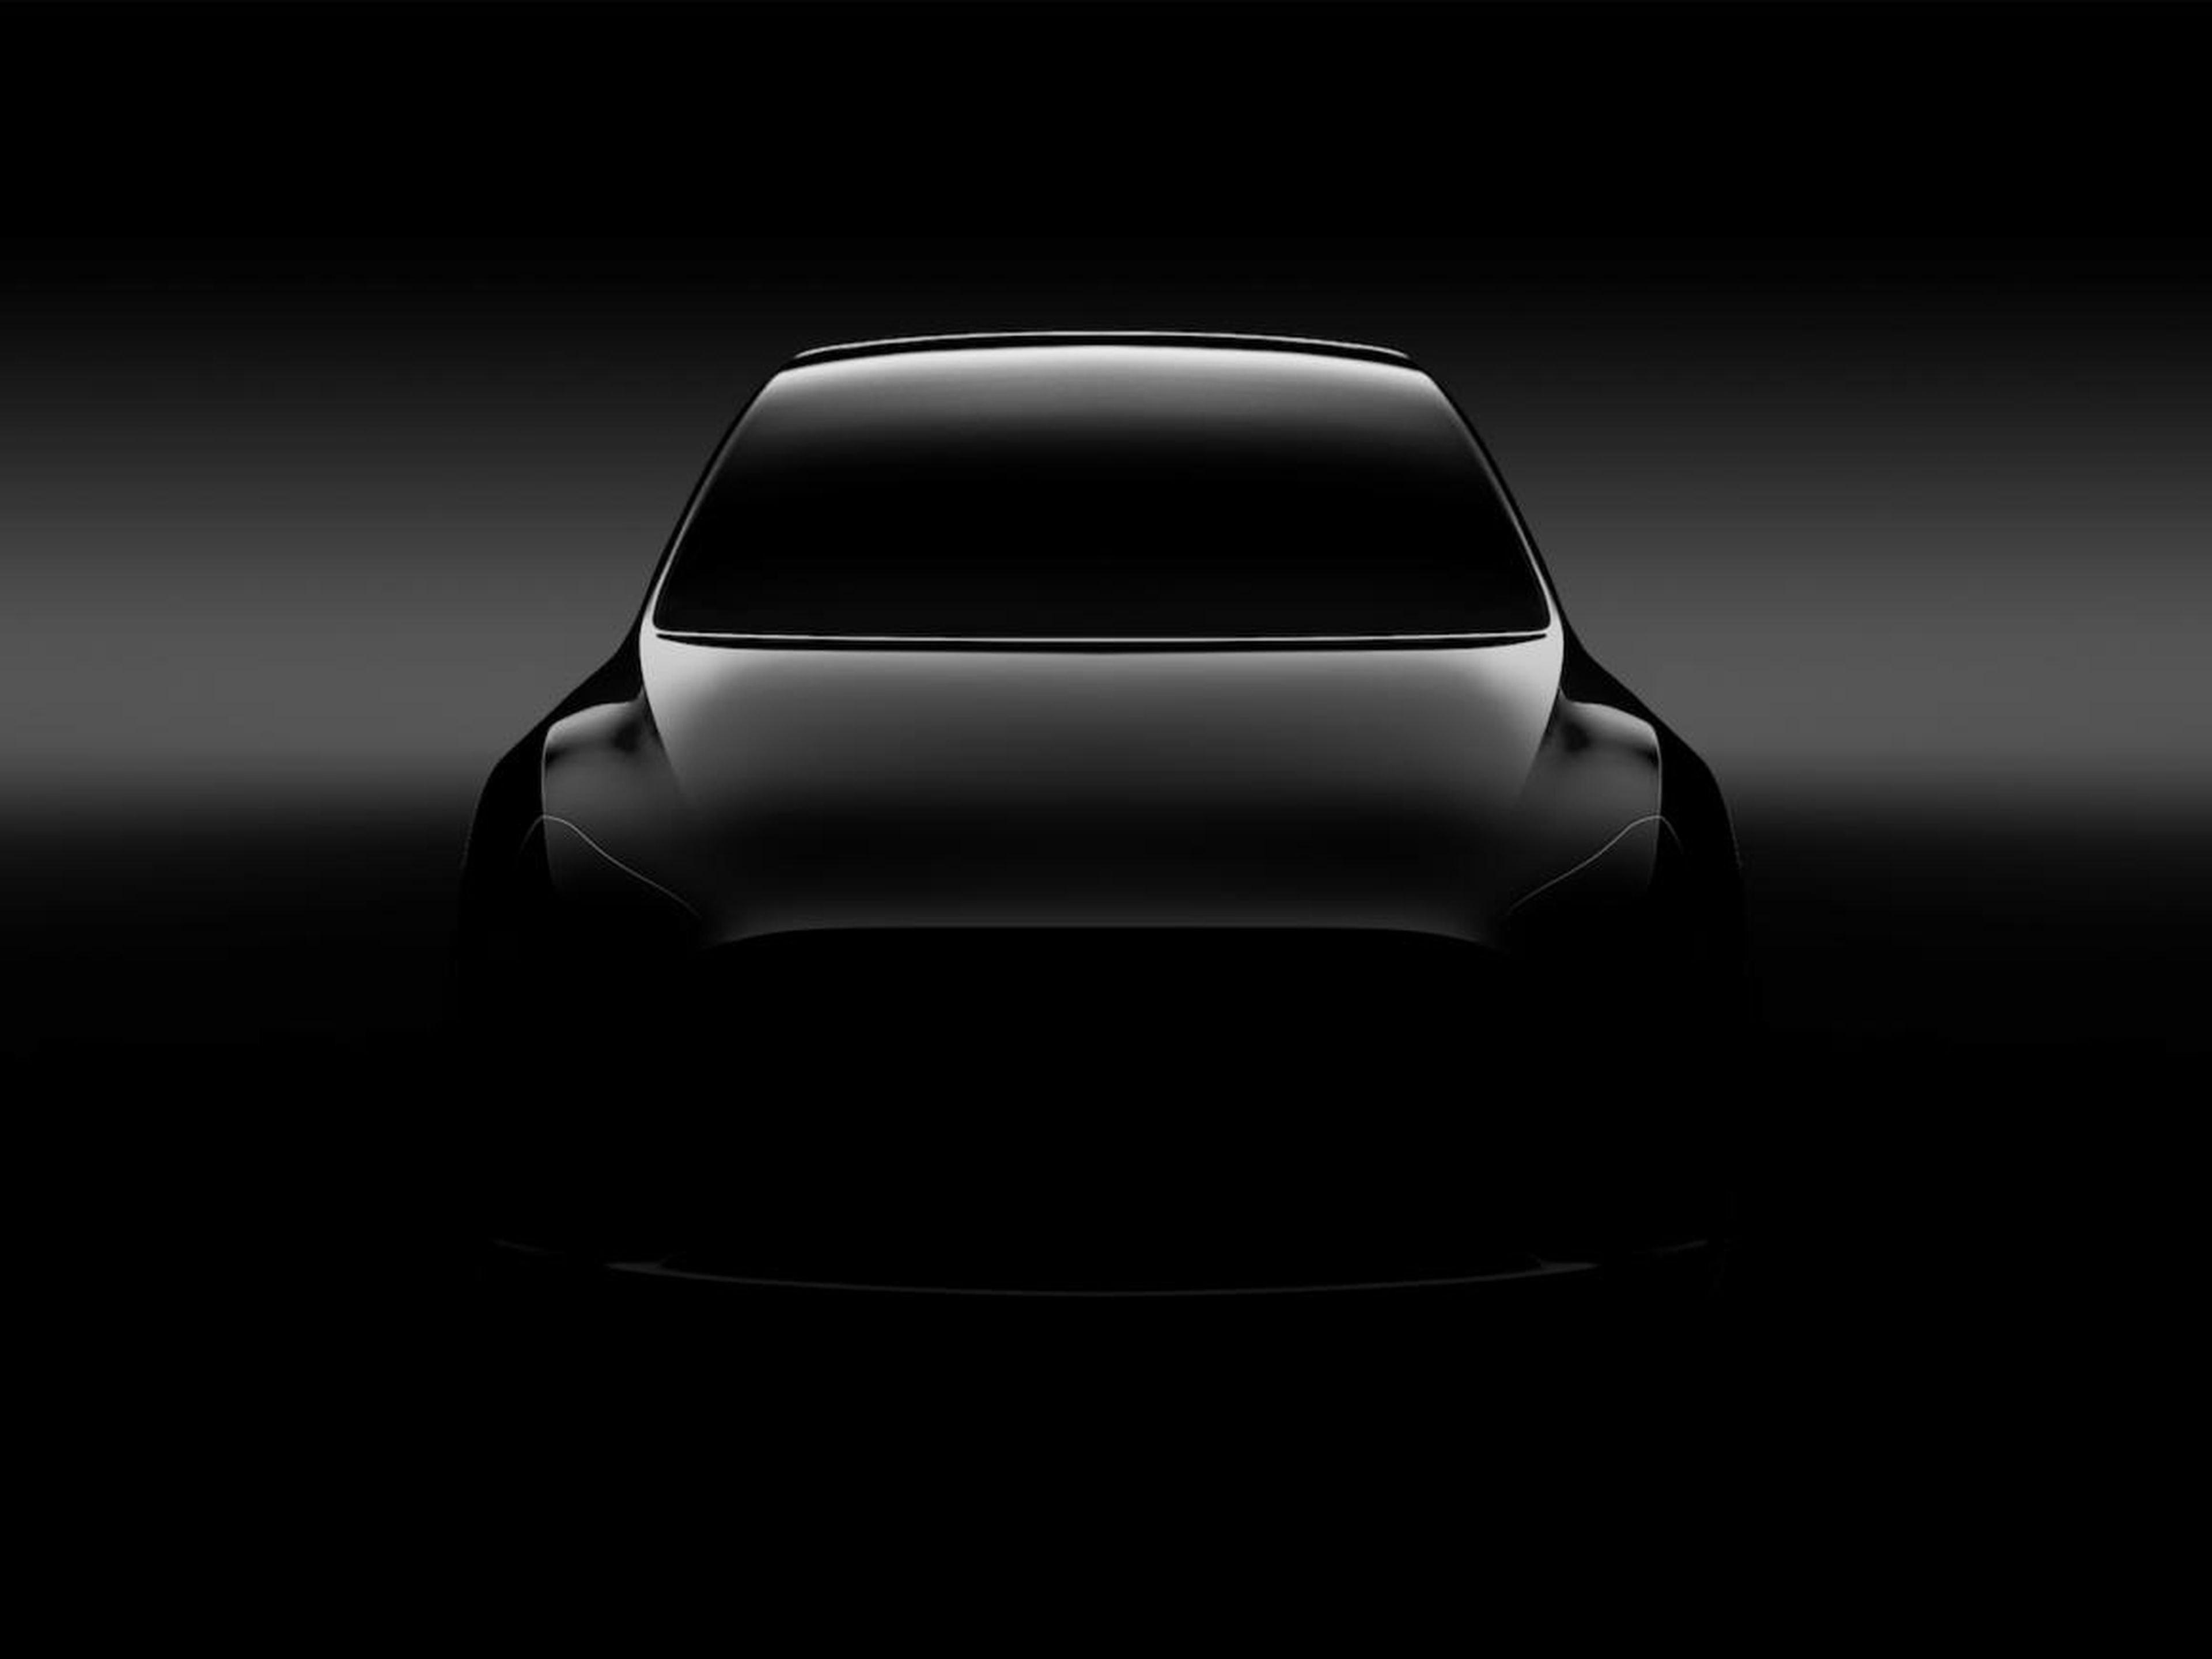 A teaser image of Tesla's upcoming Model Y crossover SUV.